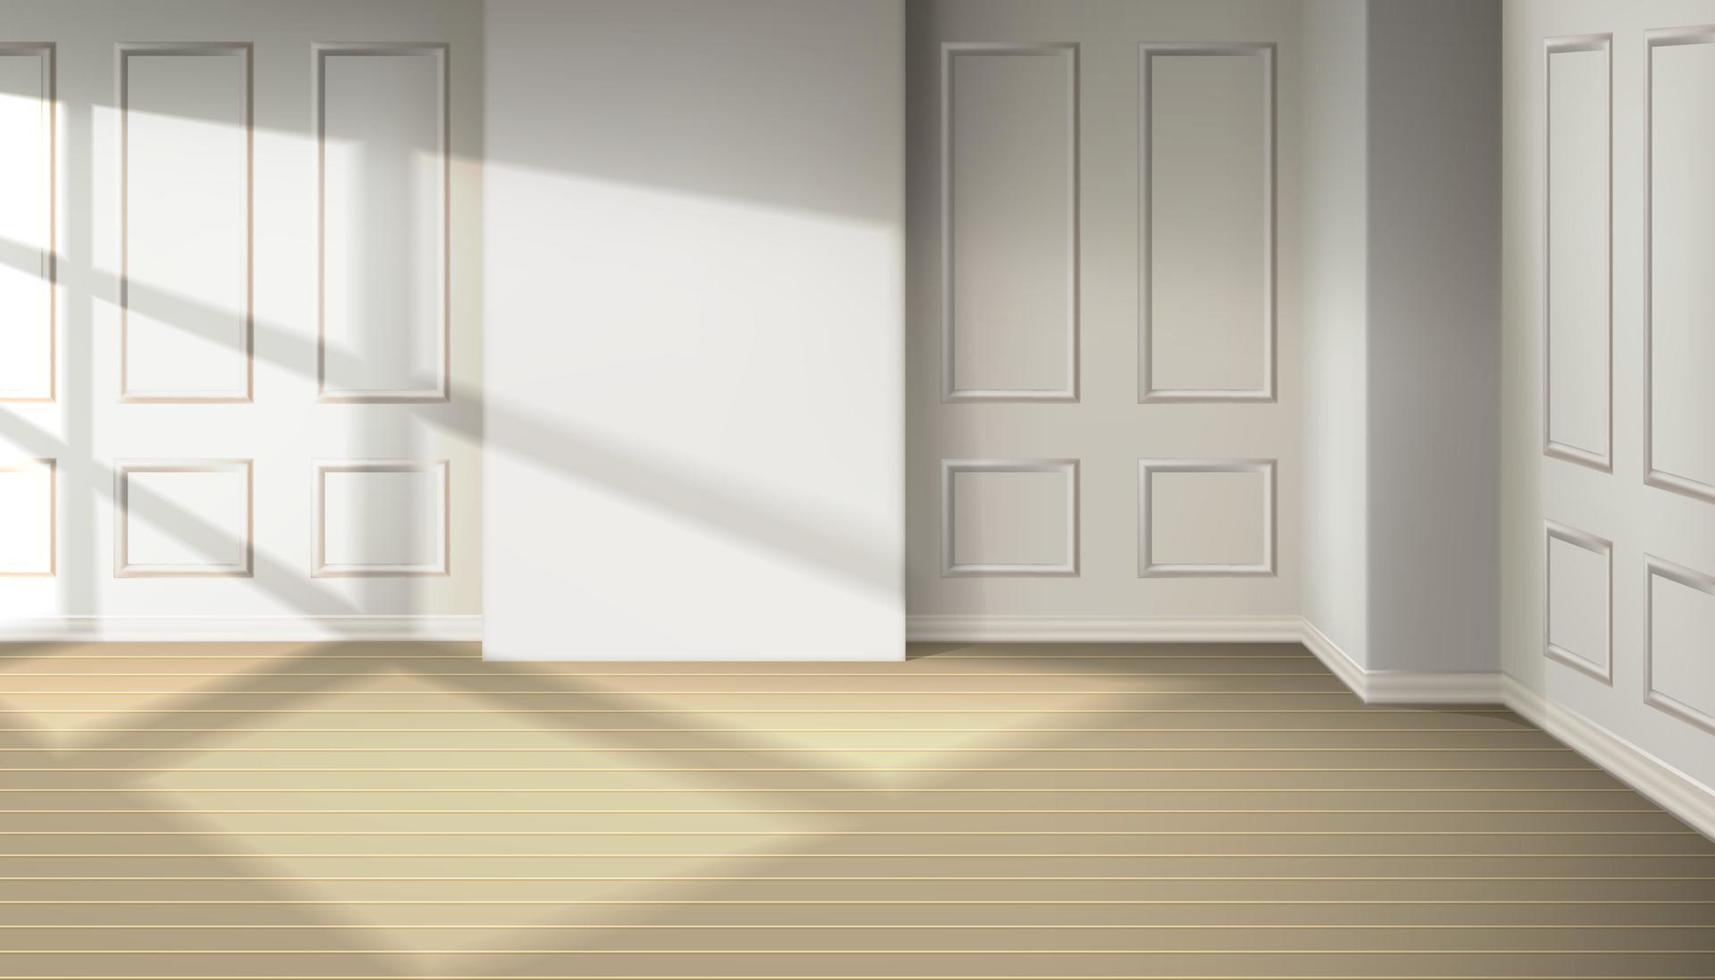 3d realistic vector room with light from the window. room design interior of apartment, office. Natural shadow effect from window on the wooden floor.